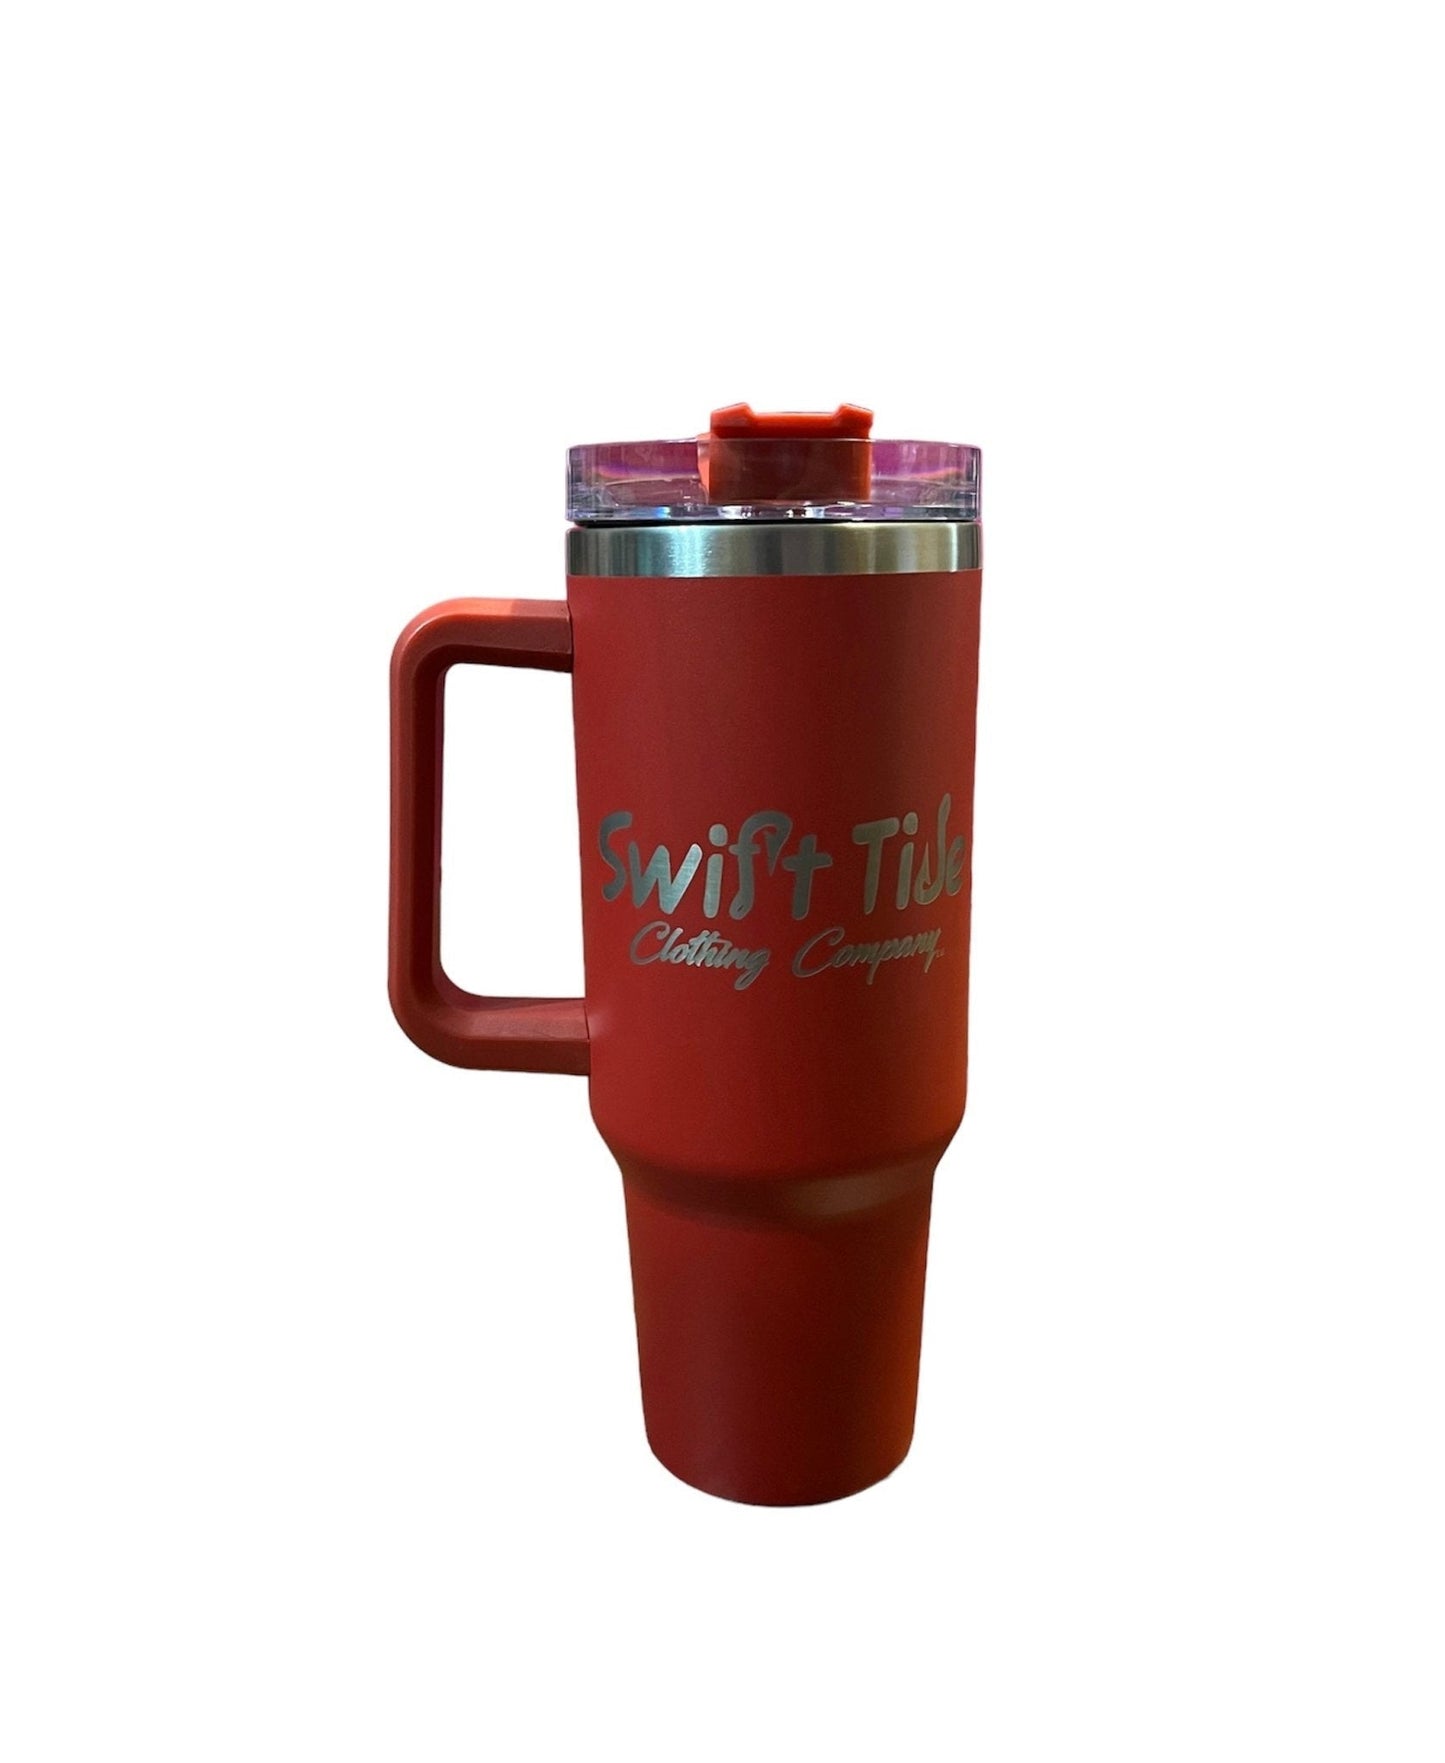 40oz Stainless Steel Tumblers - Swift Tide Clothing Company